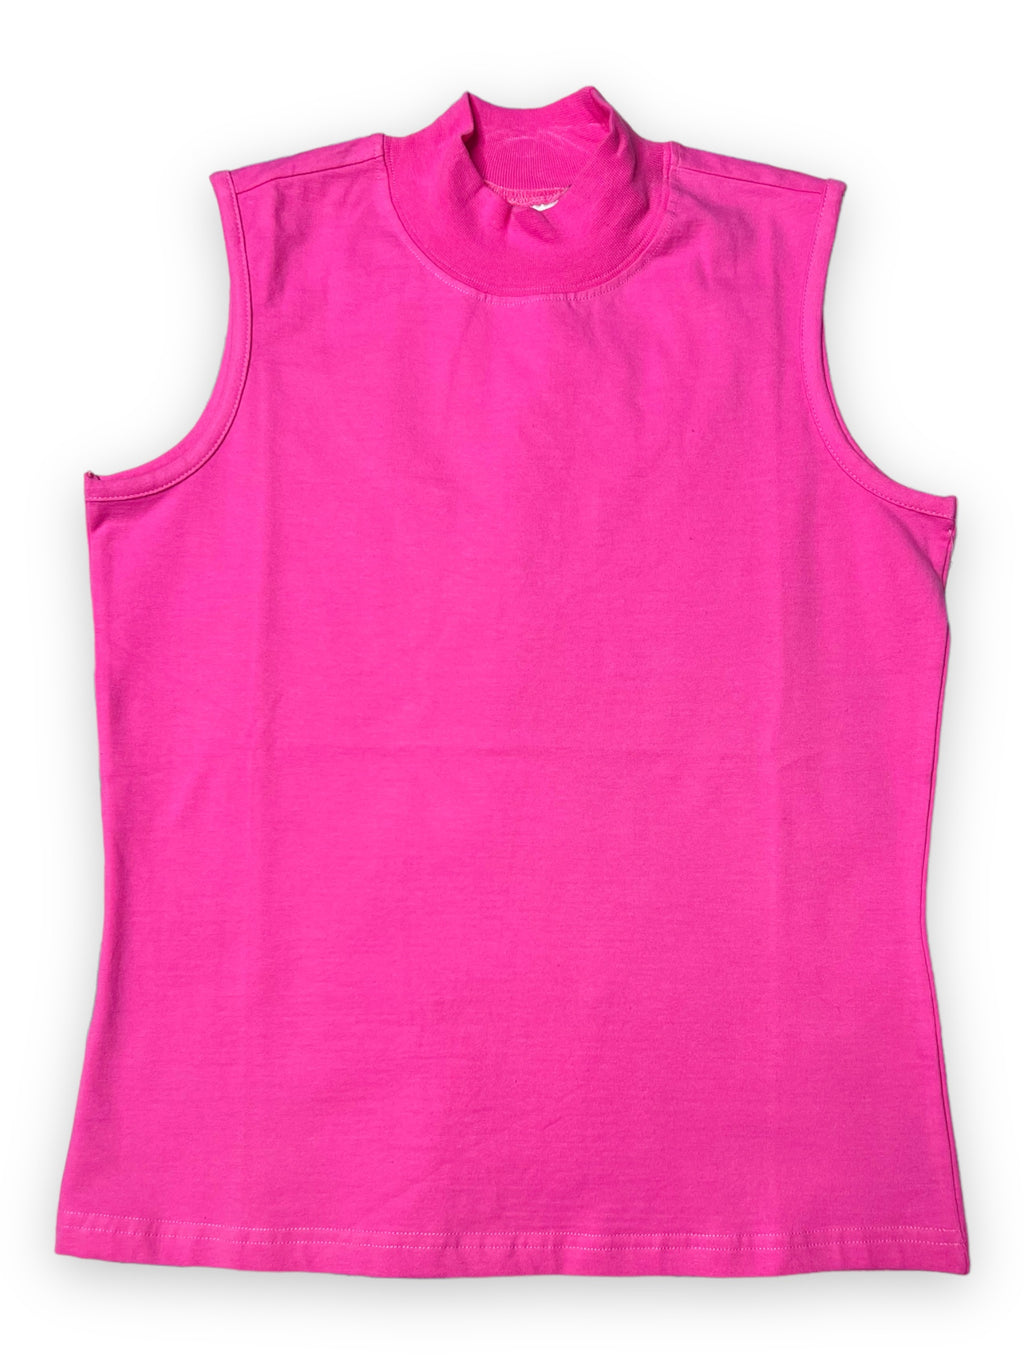 REFLECTIONS PINK MOCK NECK TANK TOP